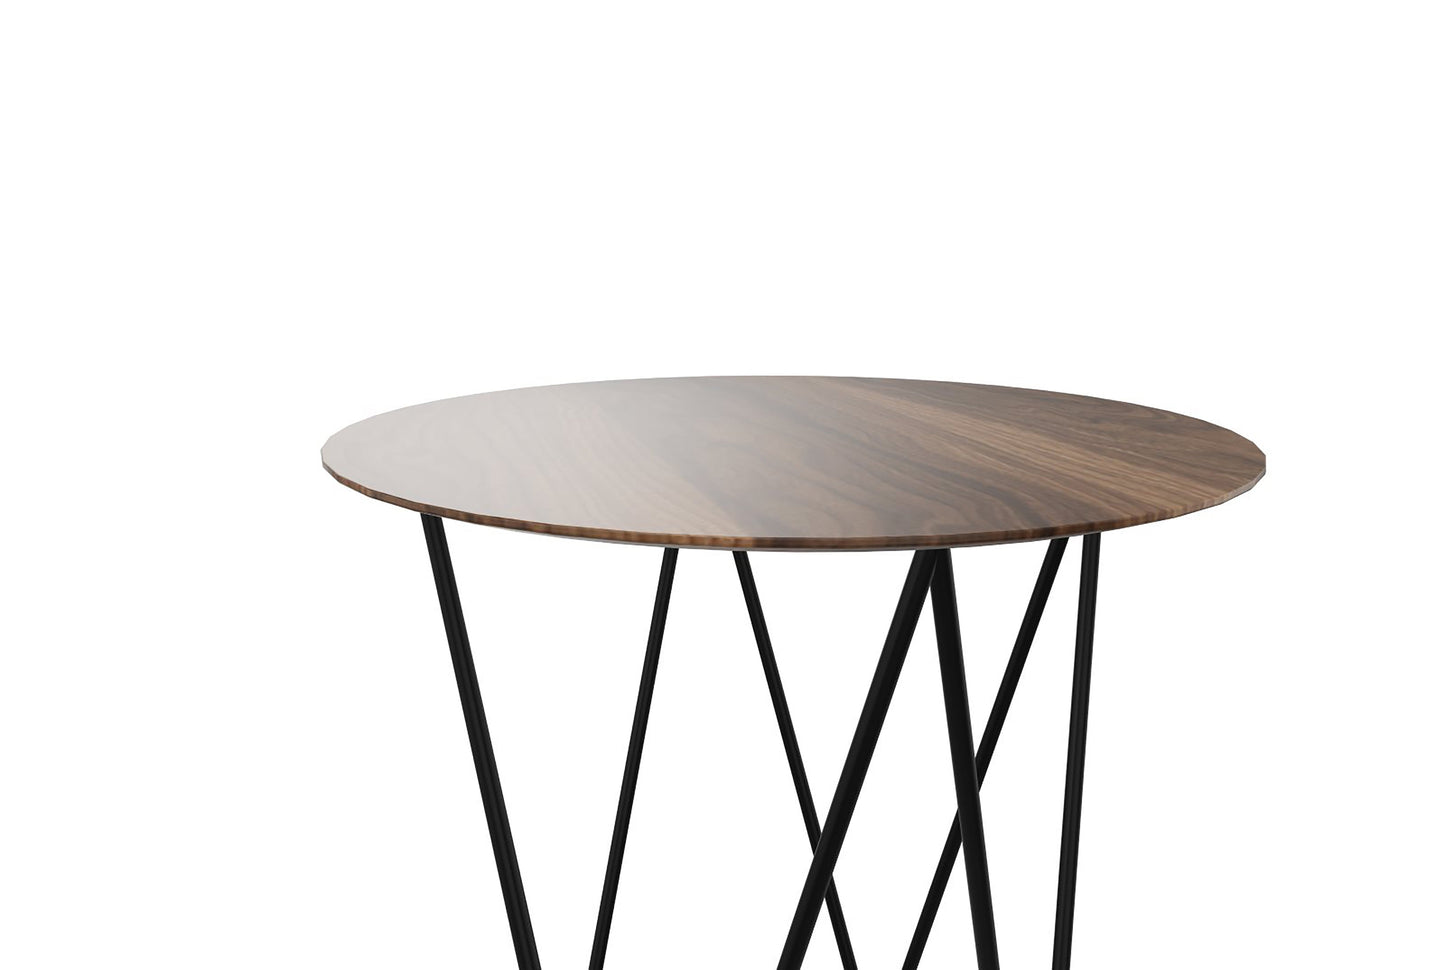 HomeRoots 19" Mod Geo Brown and Black Wood and Iron End or Side Table